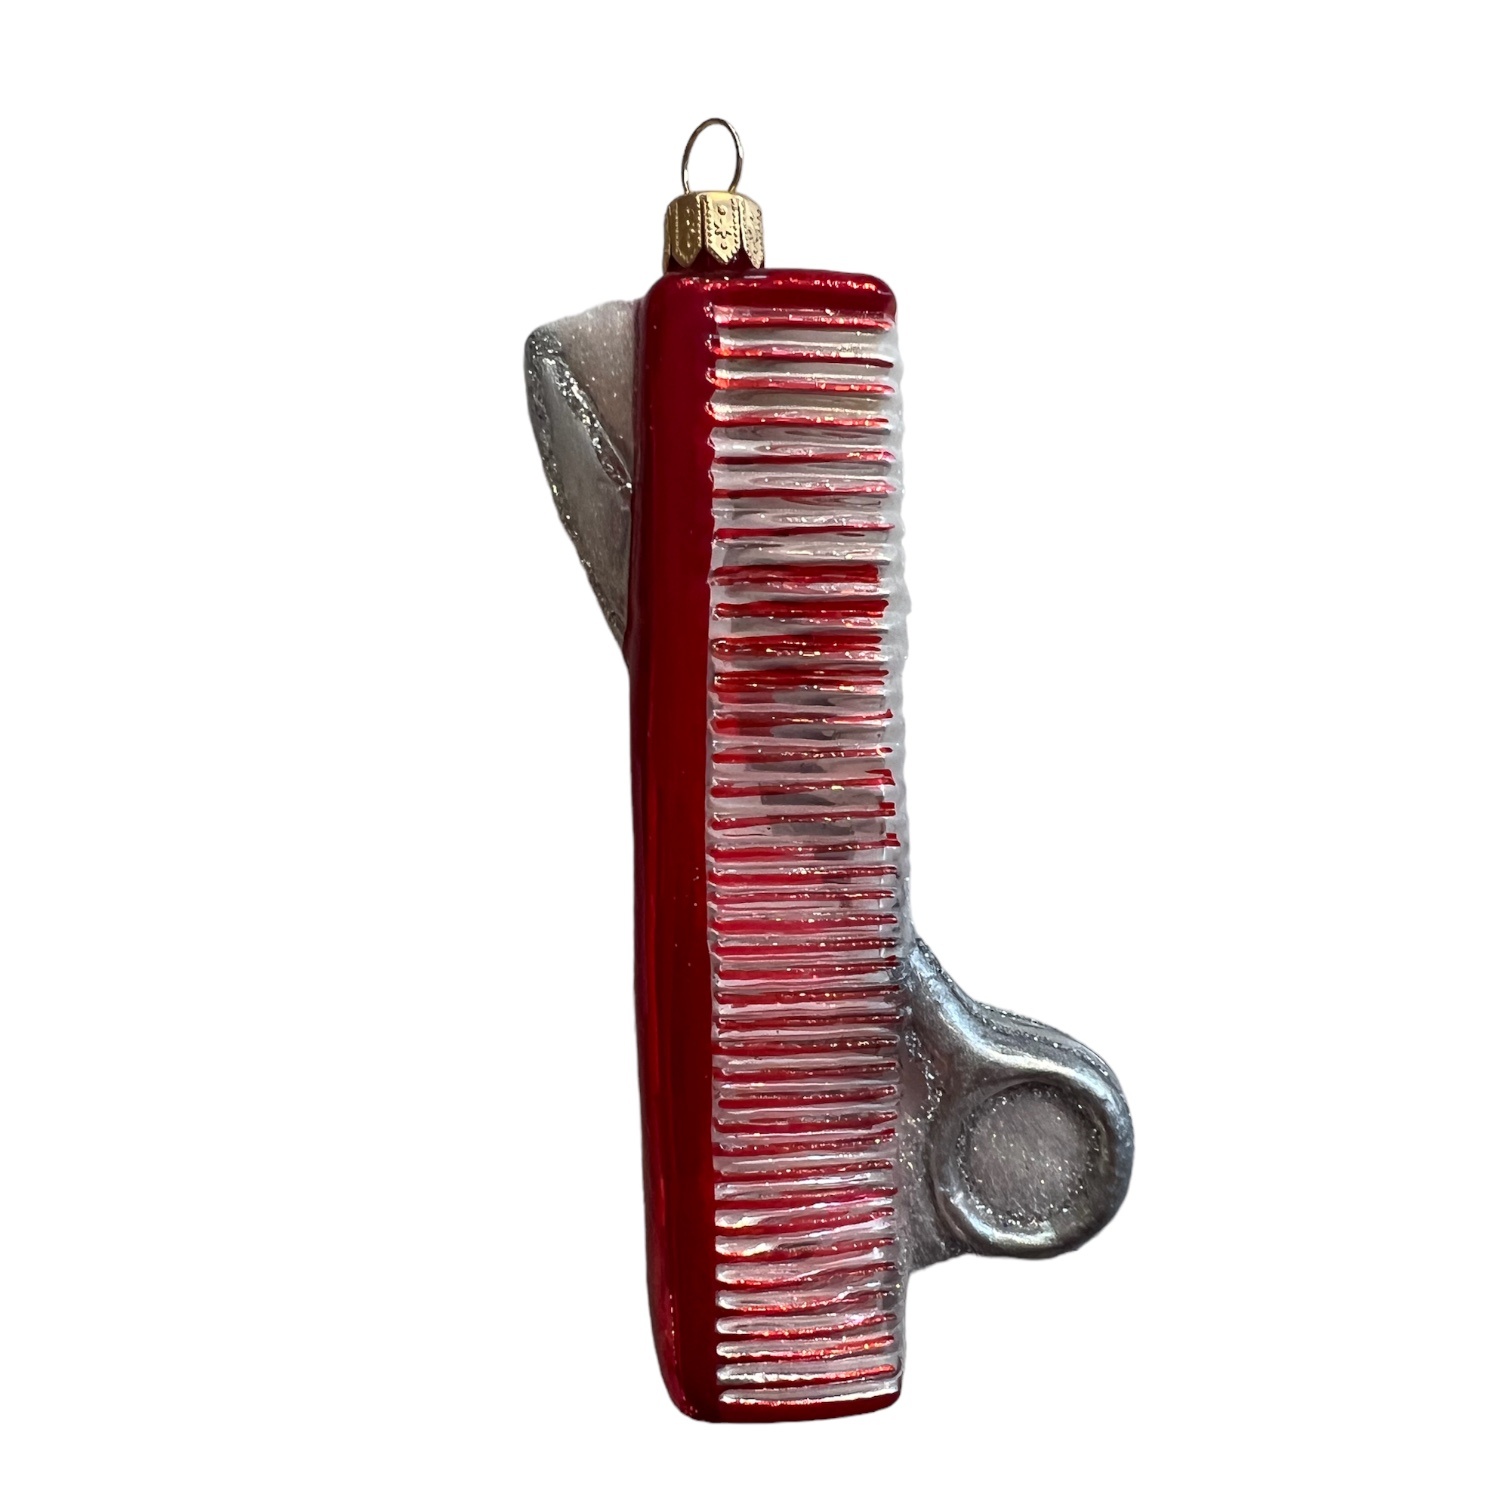 Scissors and Comb Pewter Ornament